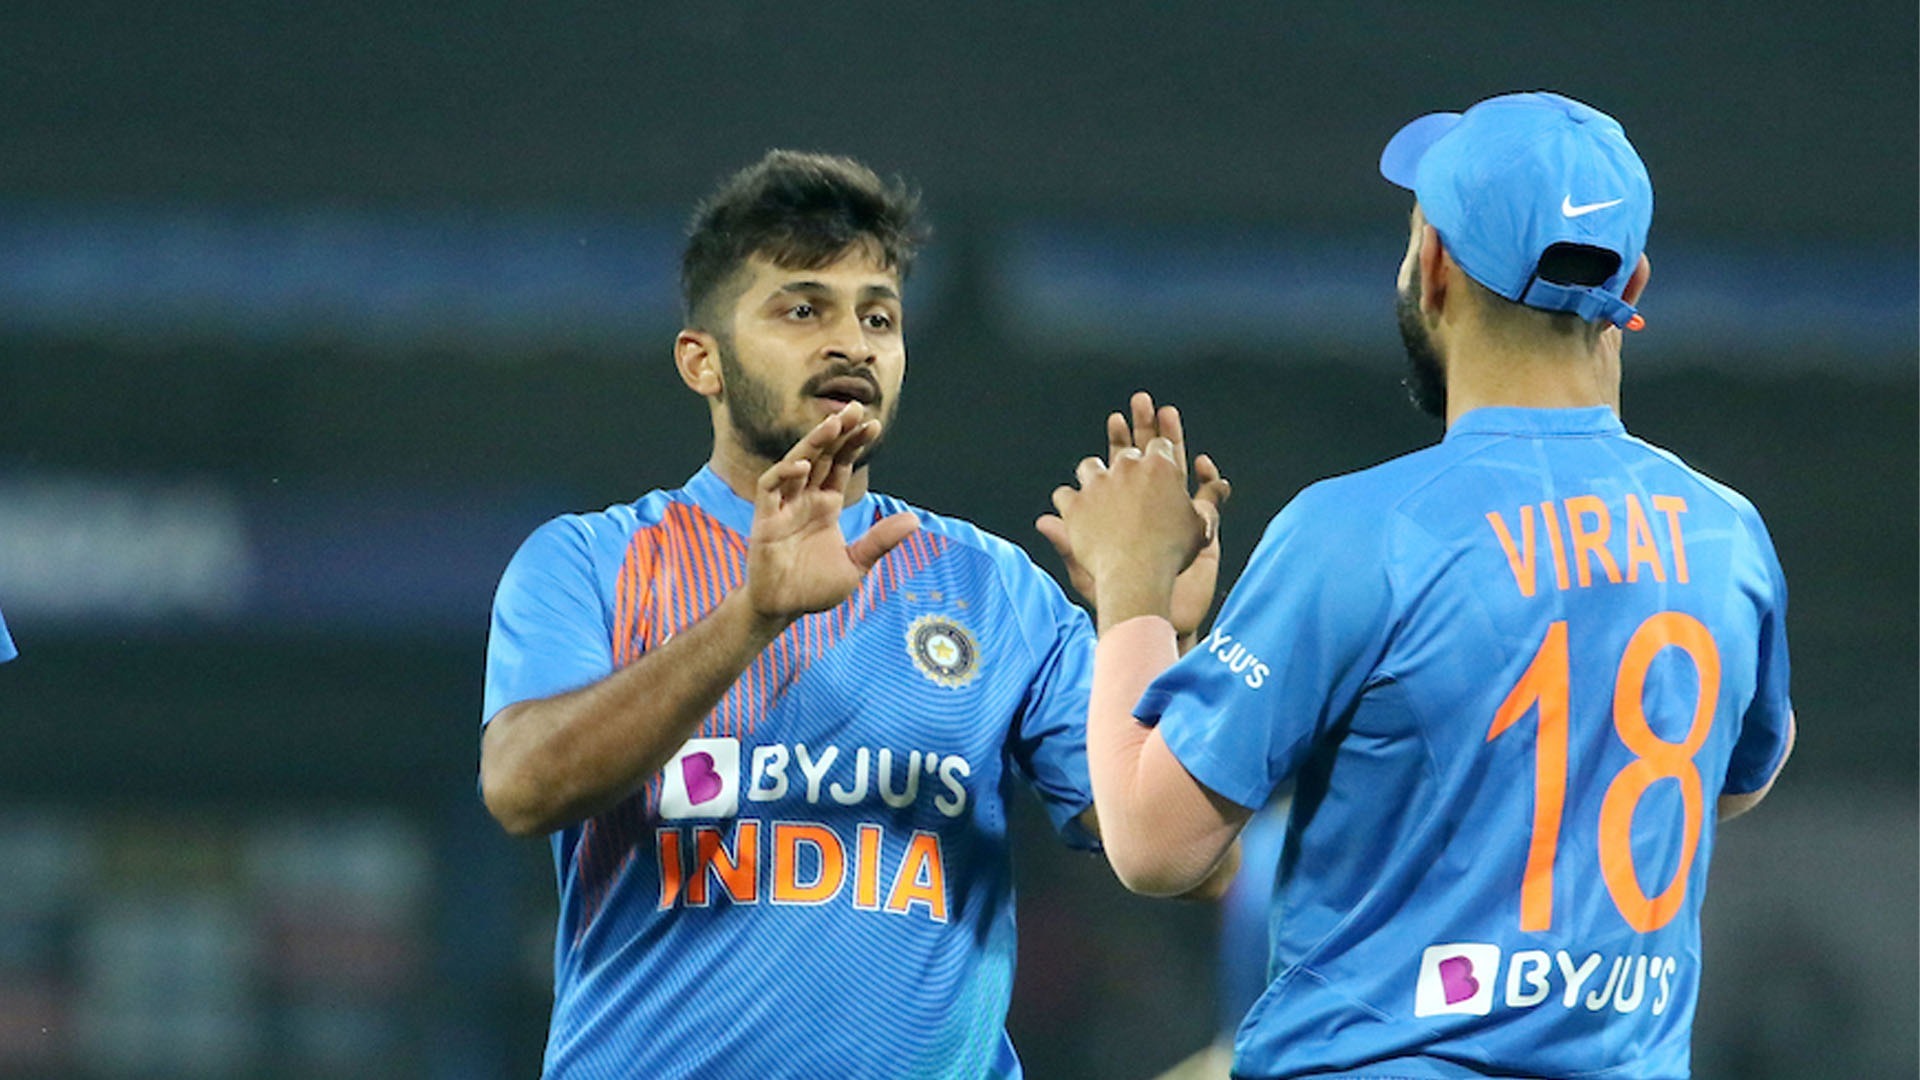 Shardul Thakur picked up two wickets in the final over in the T20I match against New Zealand.